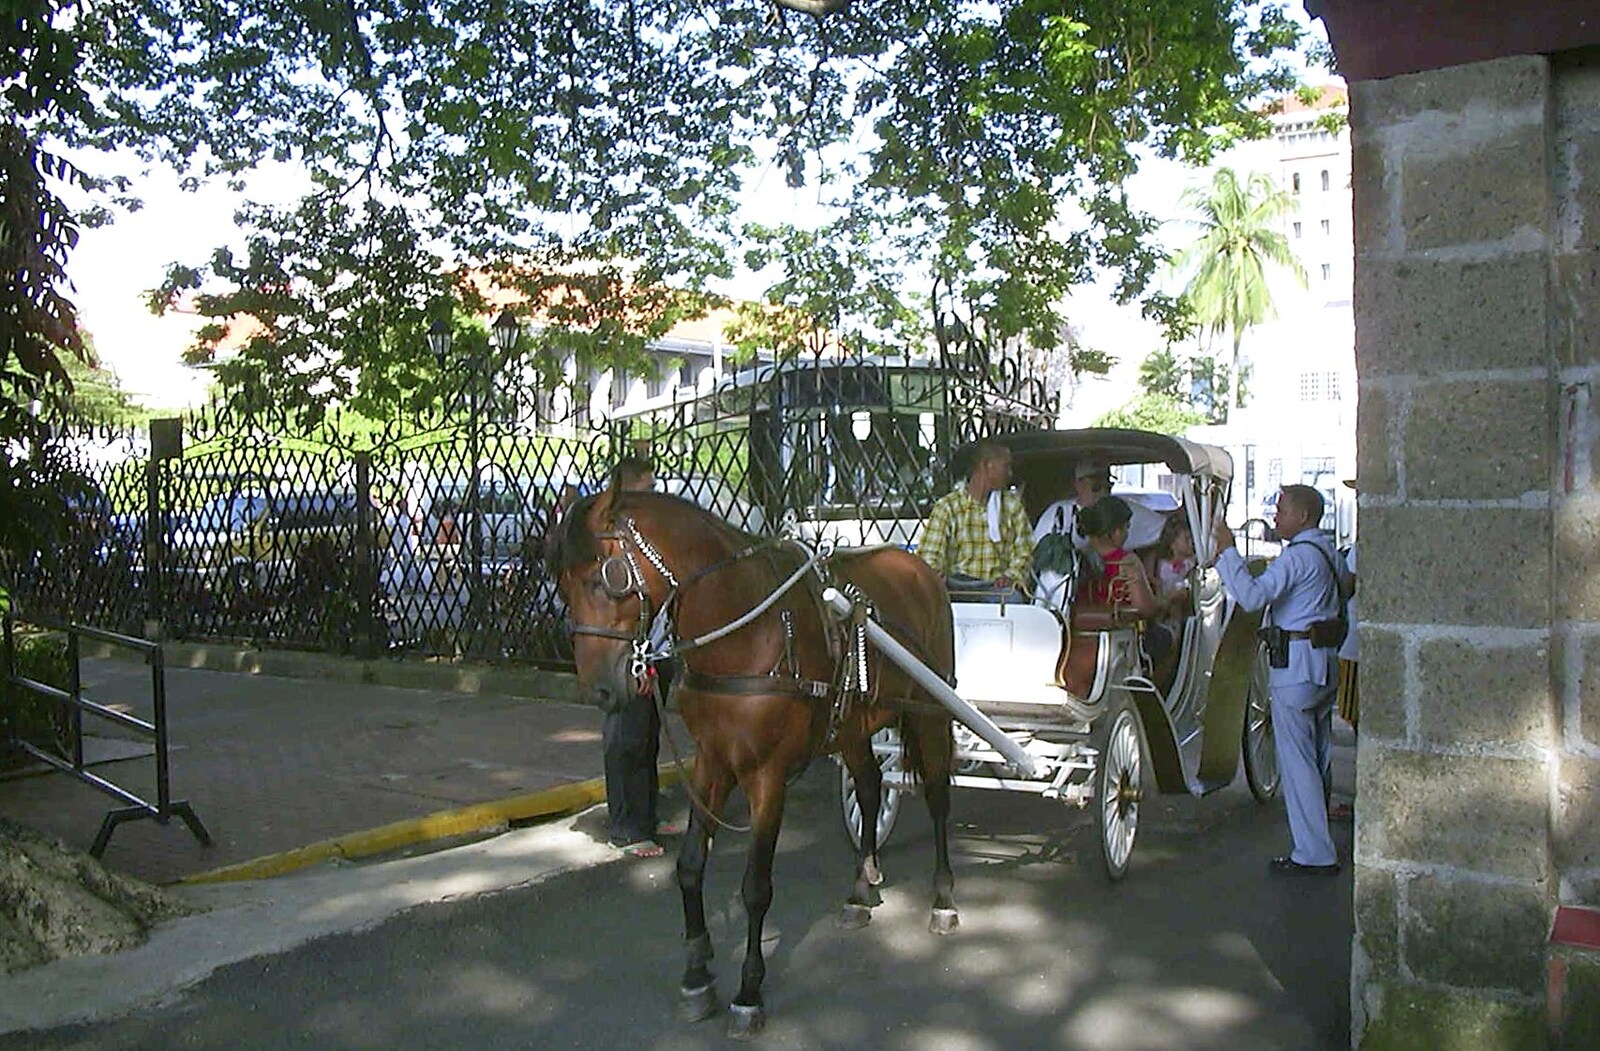 A very smelly horse and cart from A Postcard From Manila: a Working Trip, Philippines - 9th July 2004